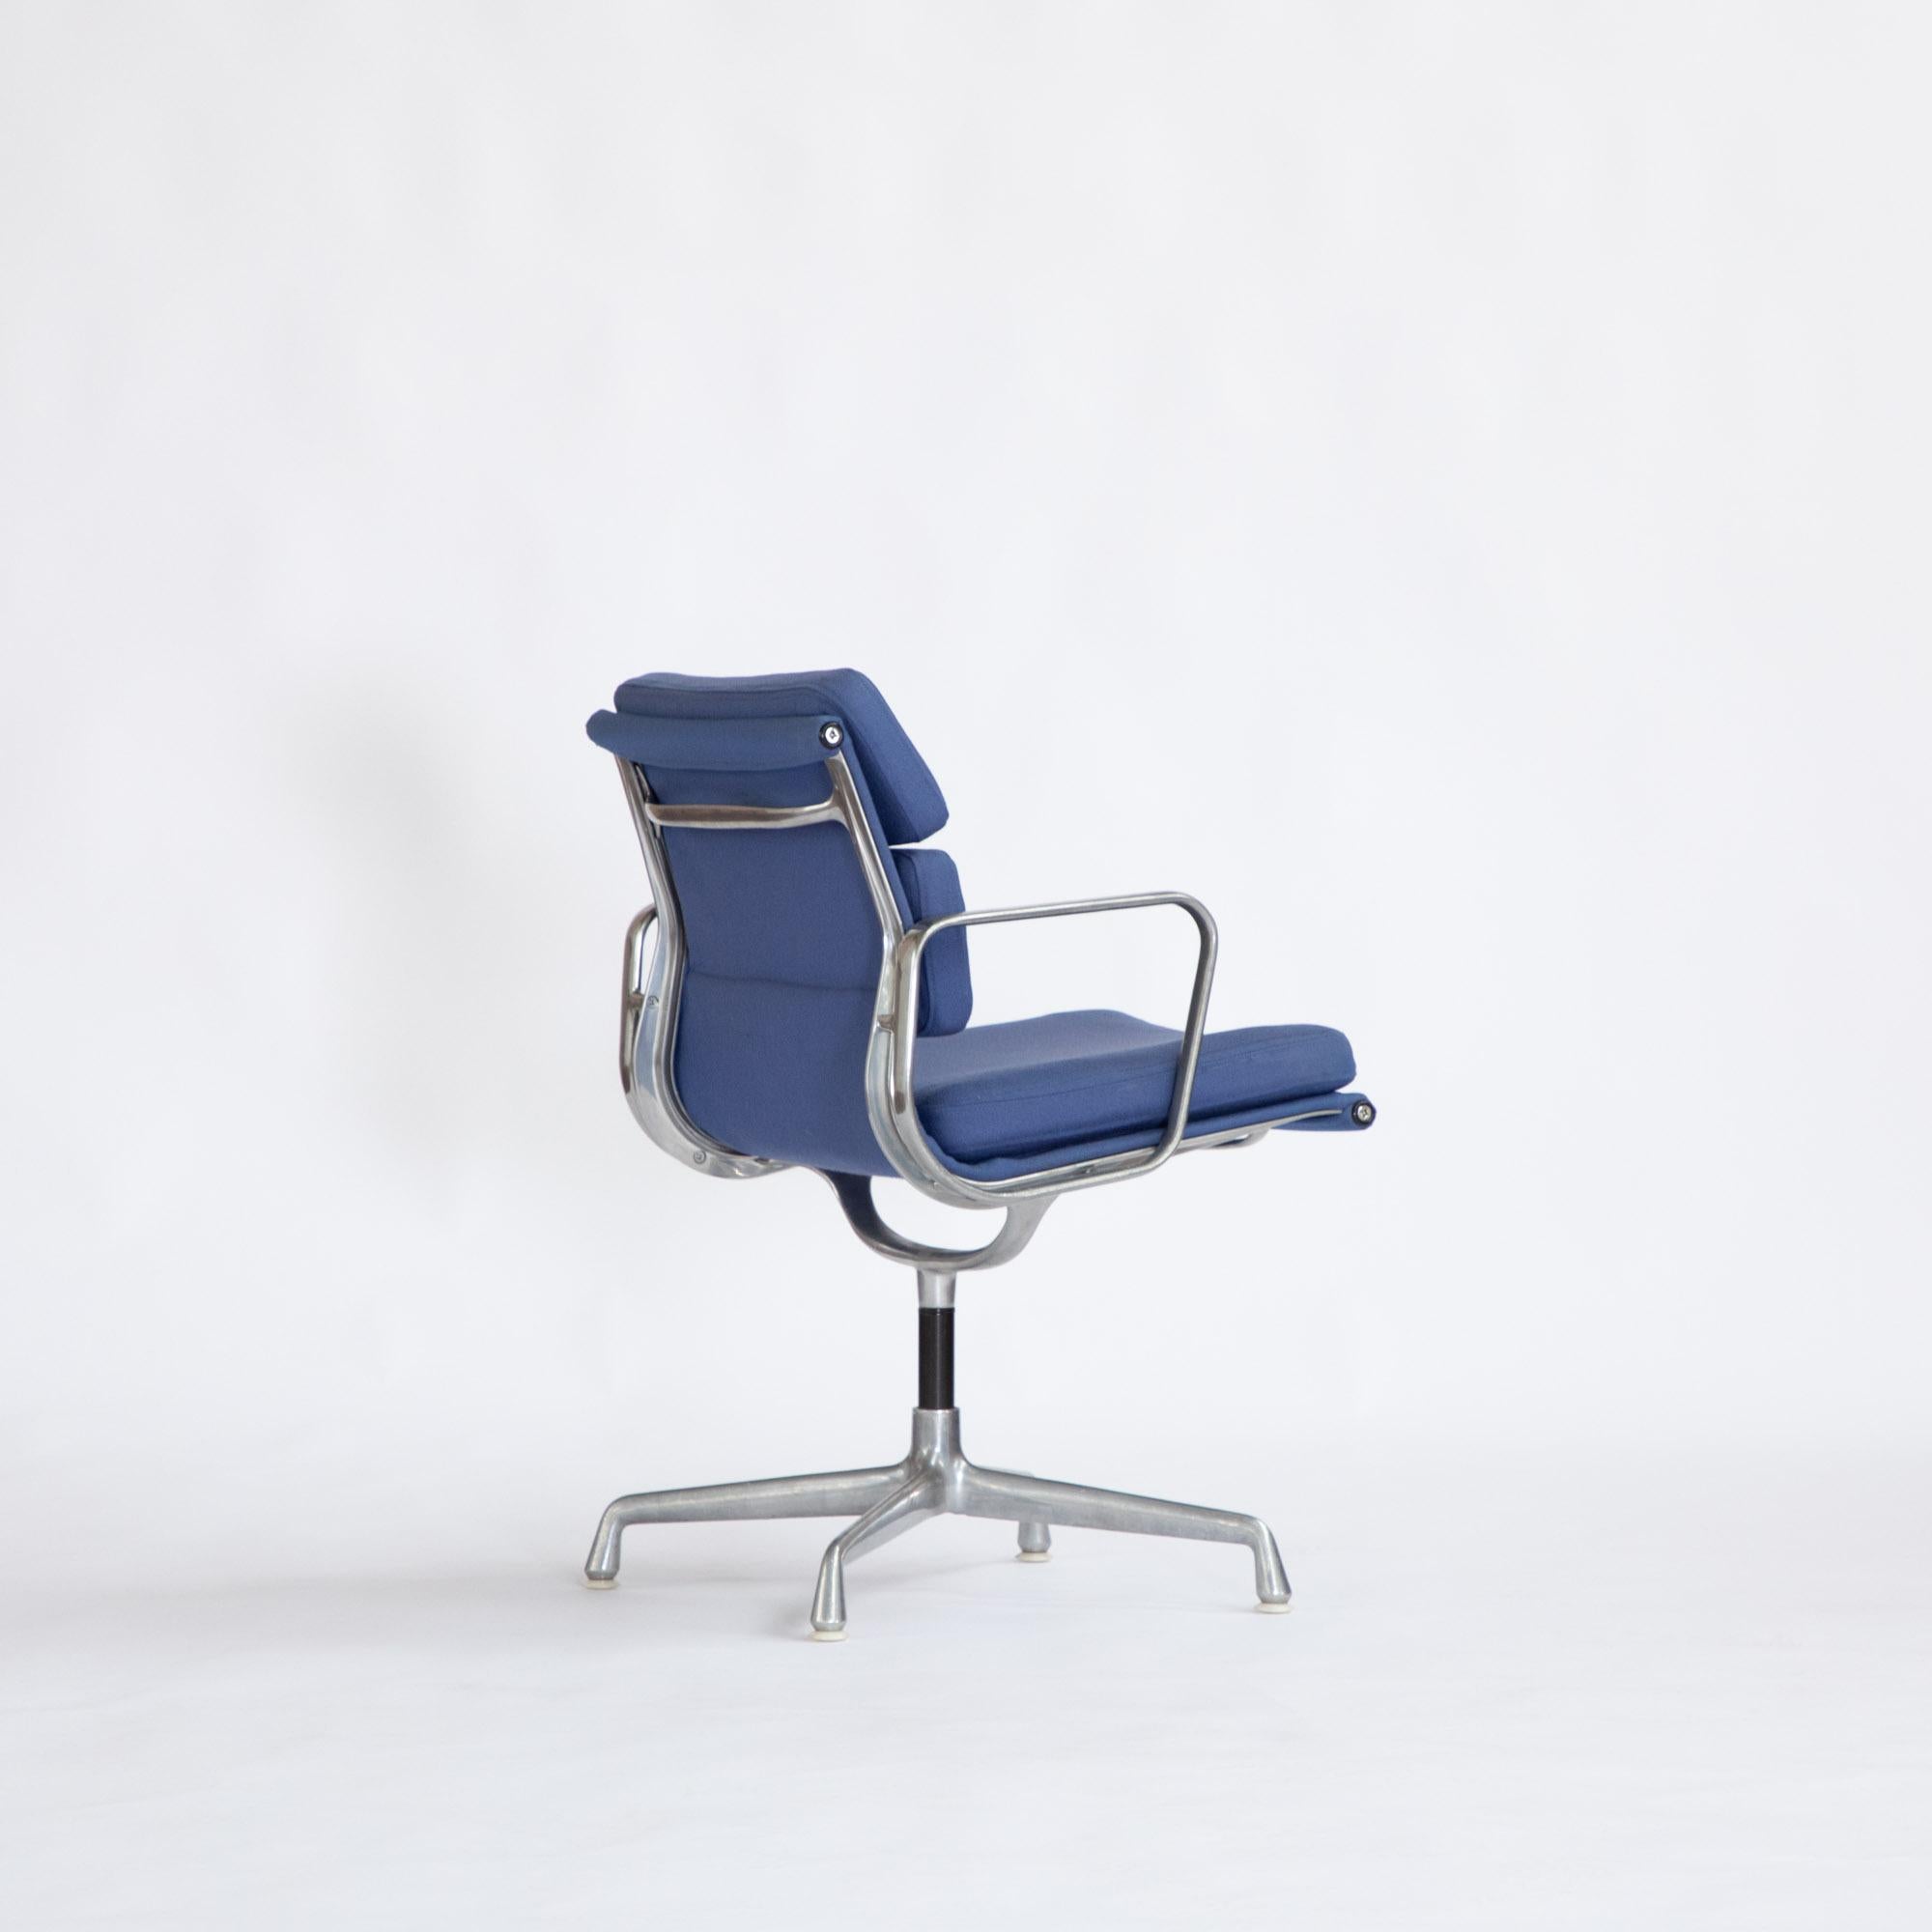 Great example of the EA208, designed by Charles and Ray Eames in 1969.
Manufactured by Herman Miller USA 1973-75
Fixed seat height
Swivel Seat on a 4 star aluminium frame. Some light wear to the frame consistent with age.
The original upholstery is